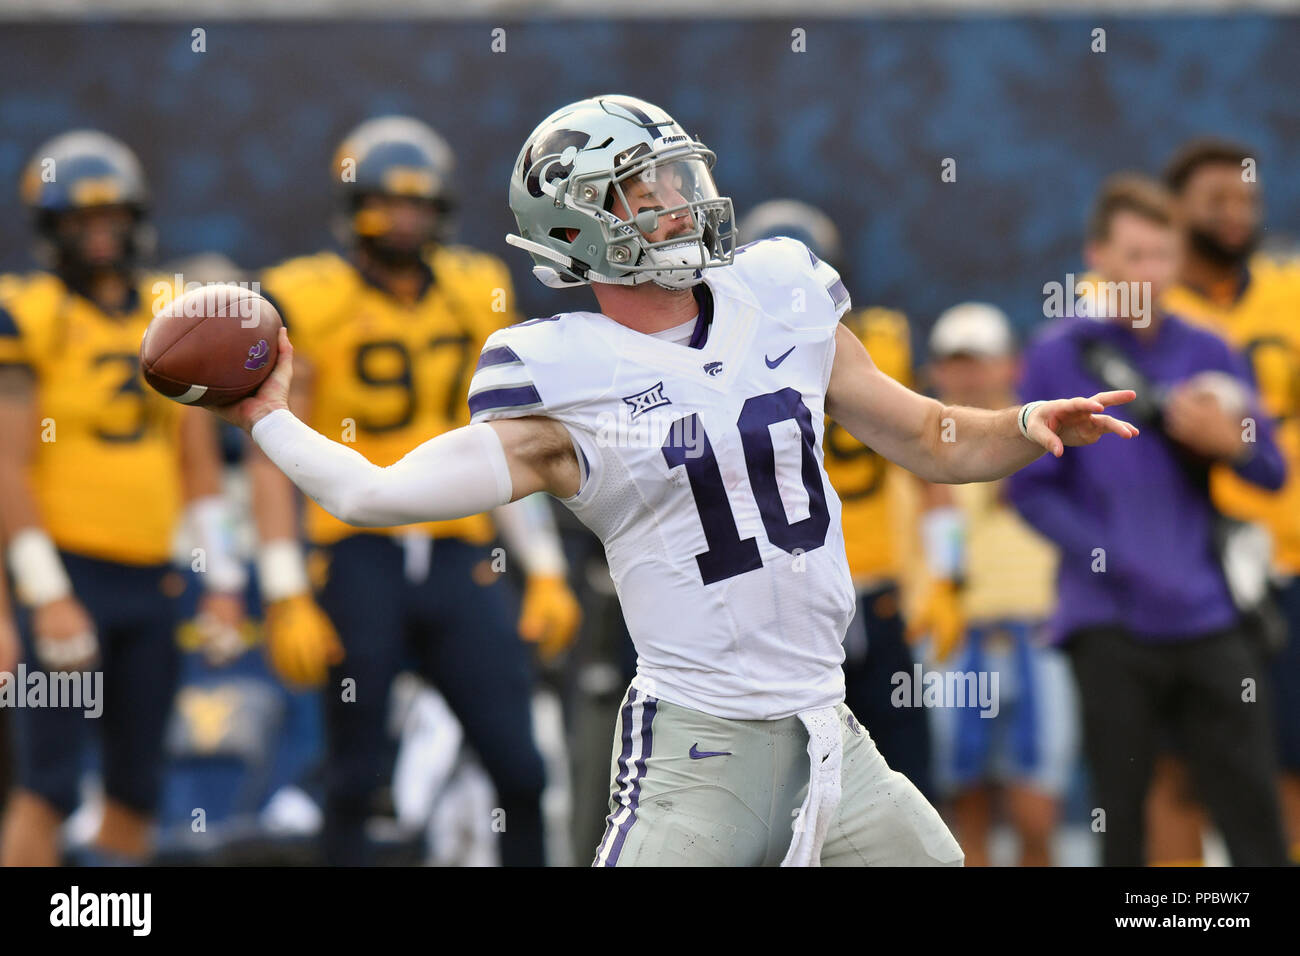 Morgantown, West Virginia, USA. 22nd Sep, 2018. Kansas State Wildcats quarterback SKYLAR THOMPSON (10) throws a deep pass during the Big 12 football game played at Mountaineer Field in Morgantown, WV. WVU beat Kansas State 35-6. Credit: Ken Inness/ZUMA Wire/Alamy Live News Stock Photo